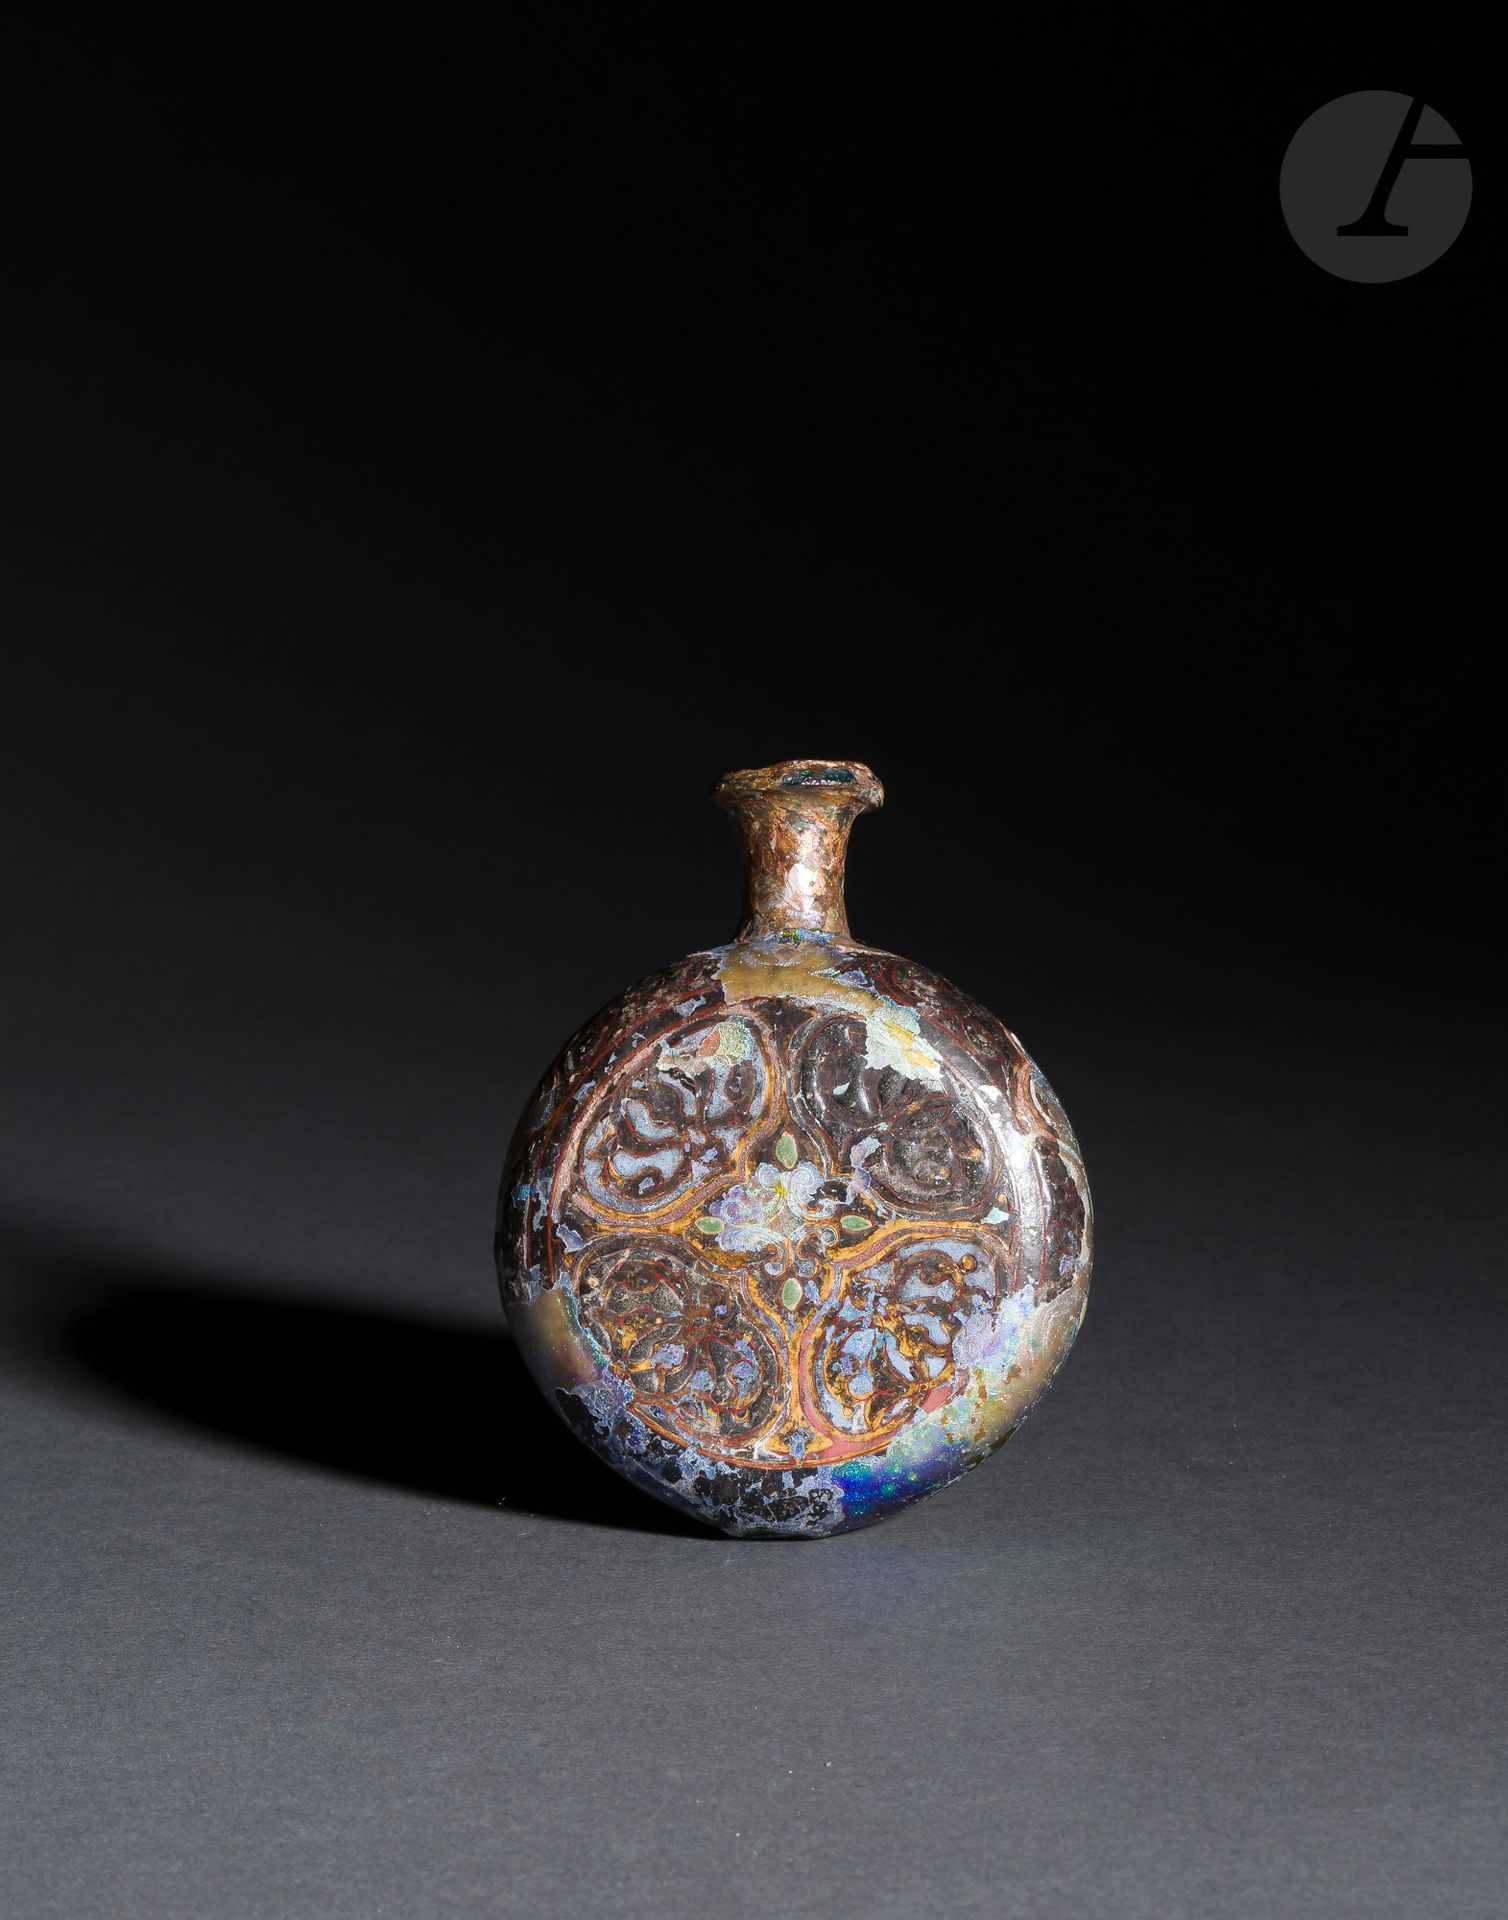 Null Flask with quatrefoil decoration, Near East or Egypt, mid-13th to mid-14th &hellip;